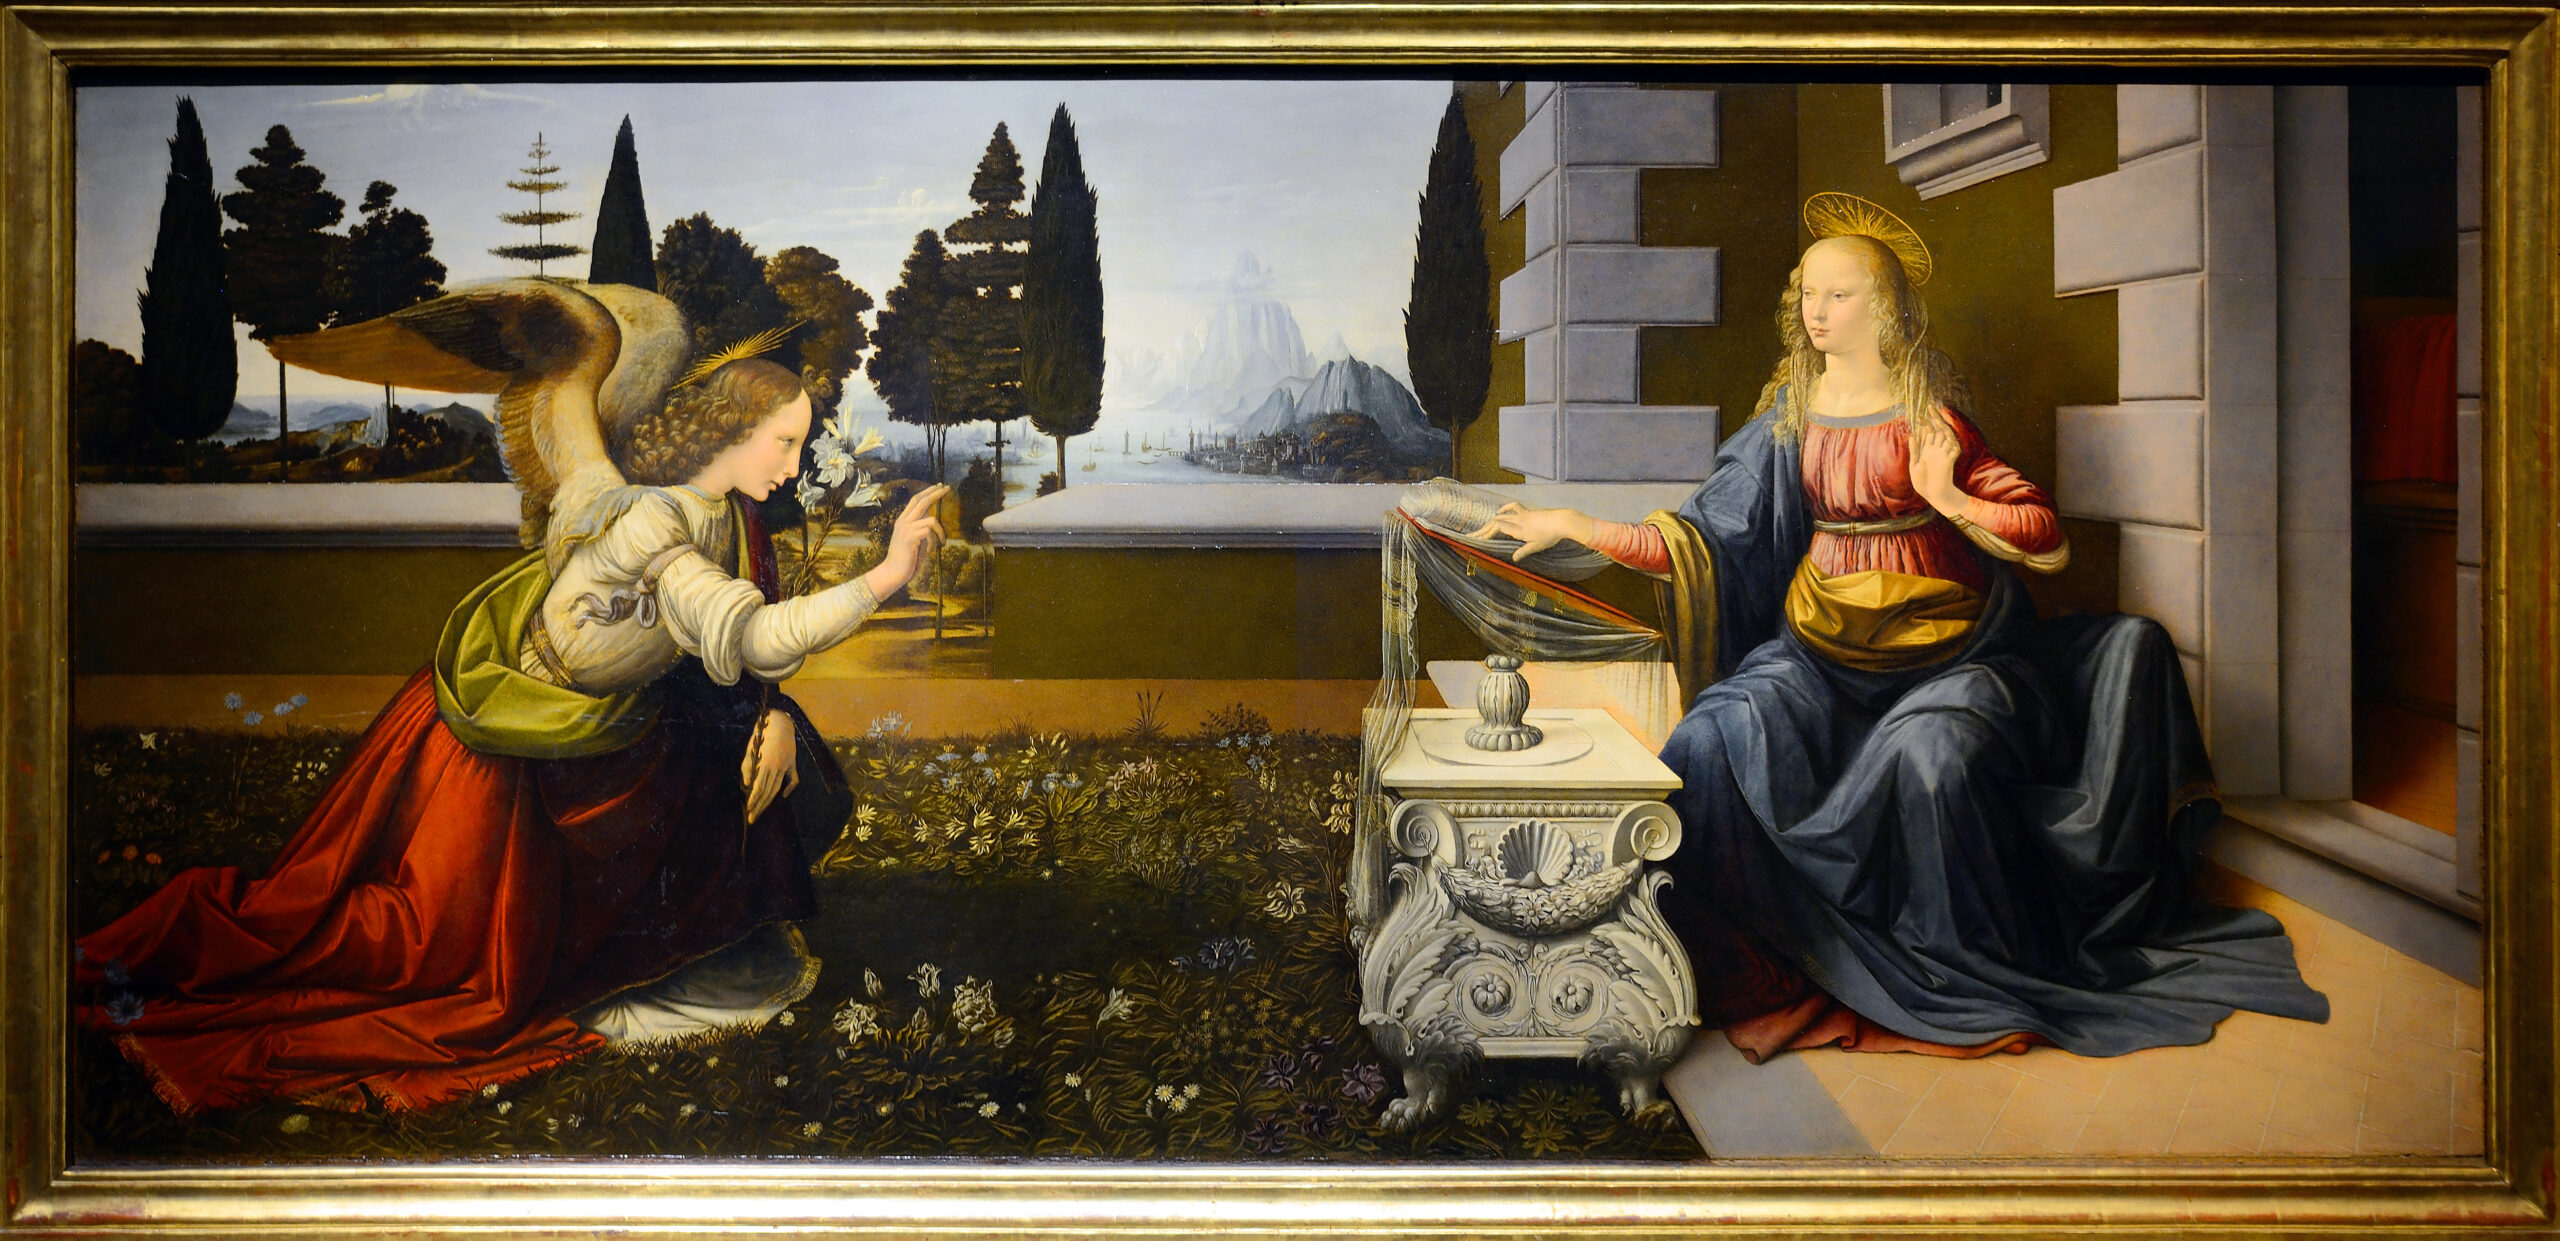 On ‘The Annunciation’